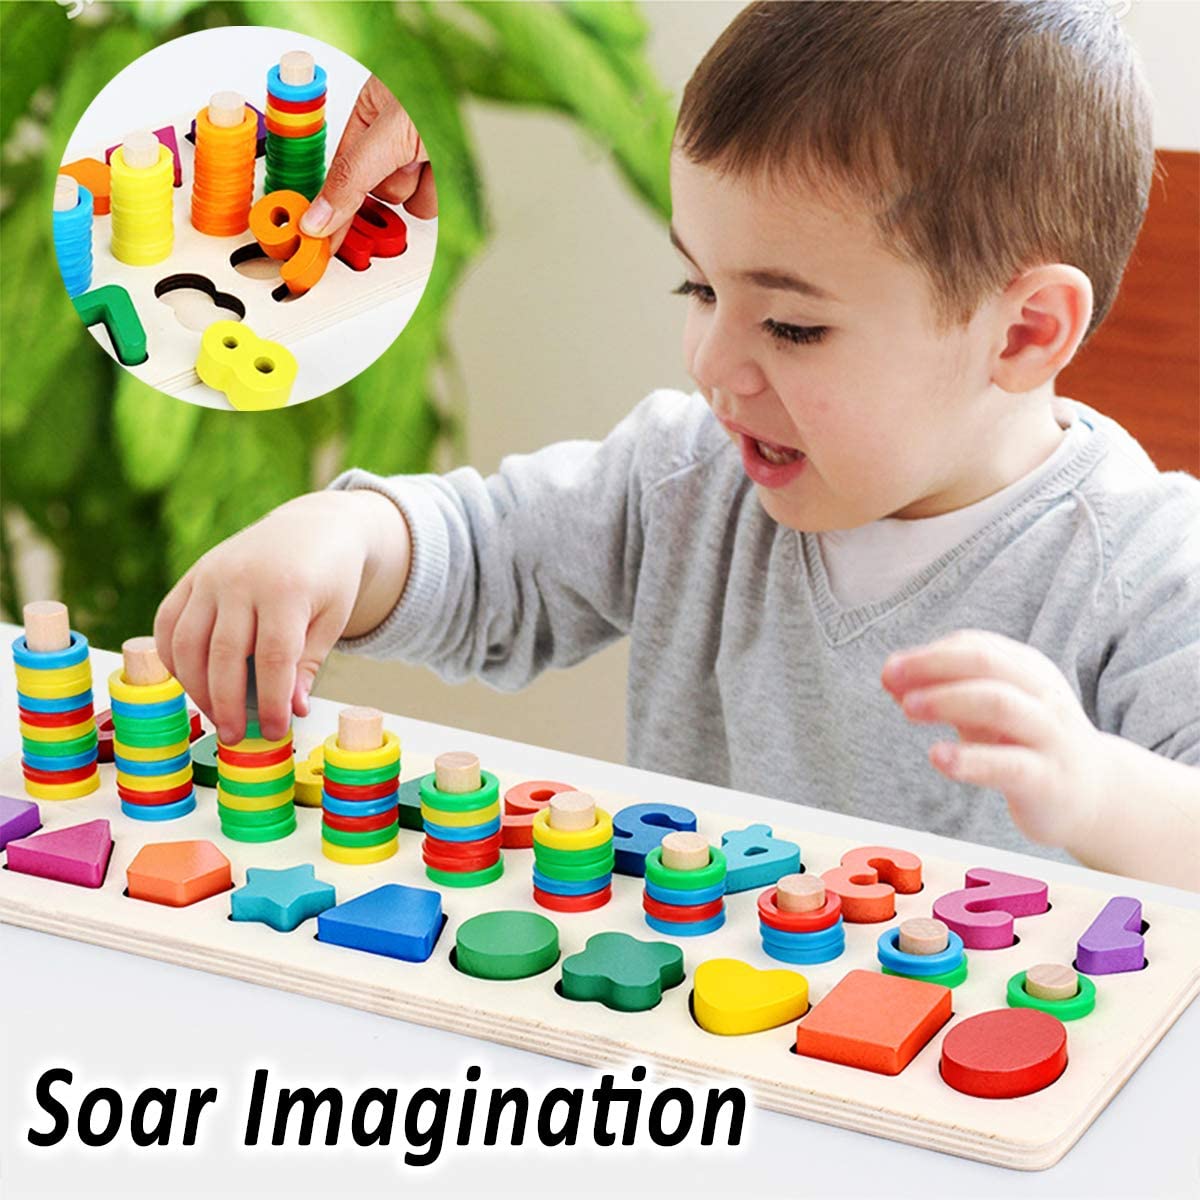 Toddlers - Shape Sorter Counting Game for Wooden Number Puzzle Sorting Montessori Toys for Age 3 4 5 Year olds Kids - Preschool Education Math Stacking Block Learning Wood Chunky Jigsaw - image 4 of 6